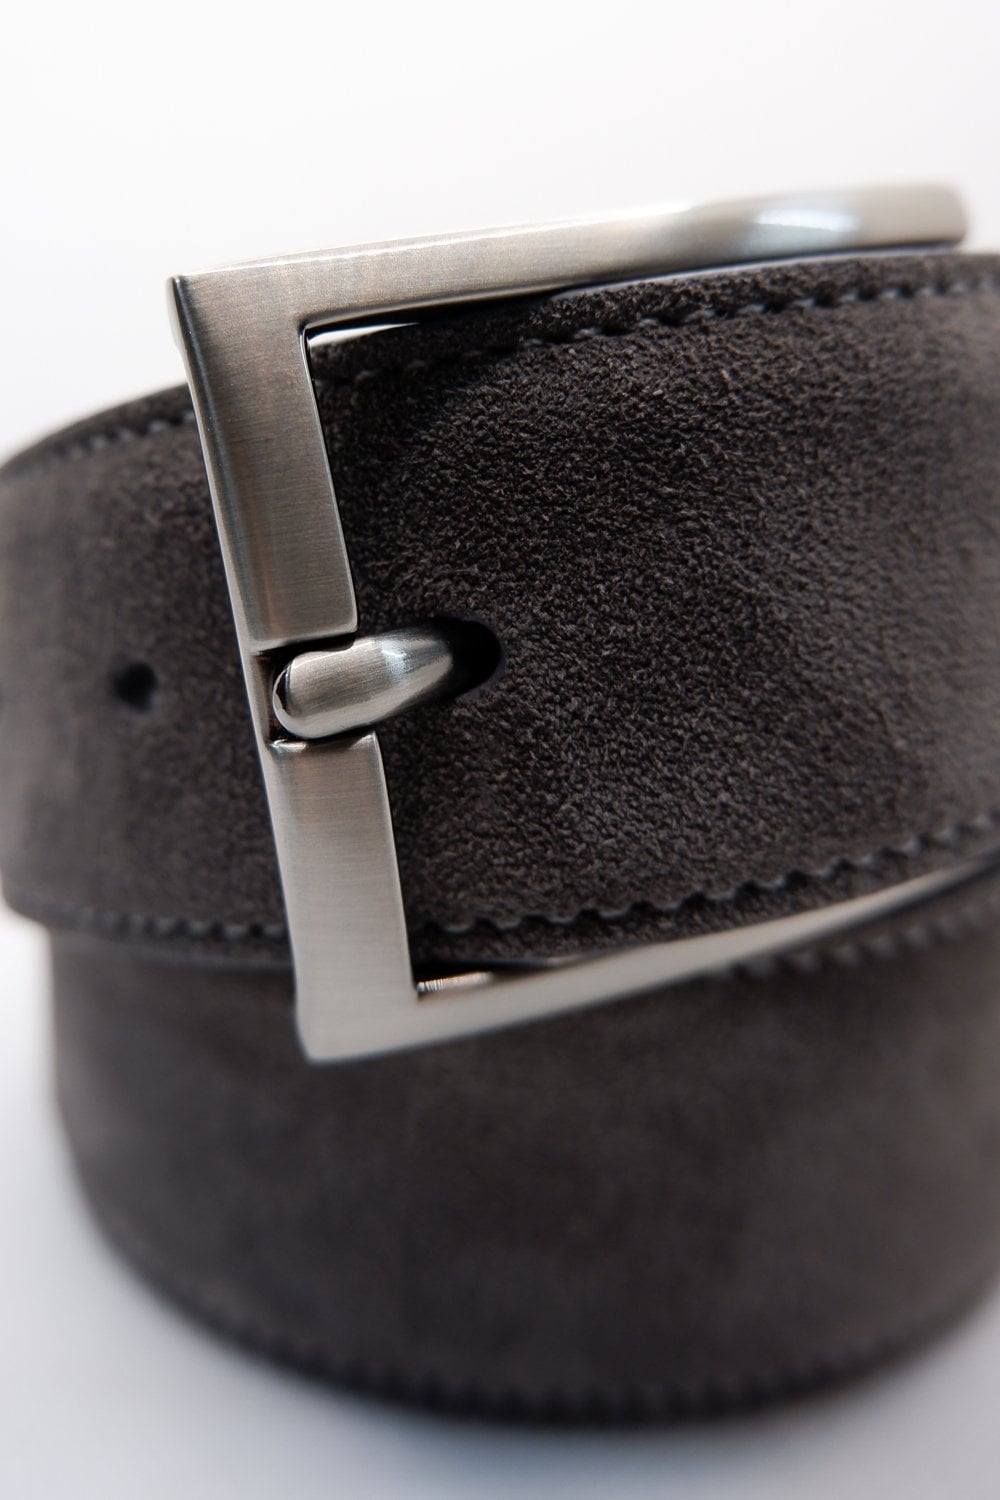 Buy the Elliot Rhodes Suede ER Belt Grey at Intro. Spend £50 for free UK delivery. Official stockists. We ship worldwide.